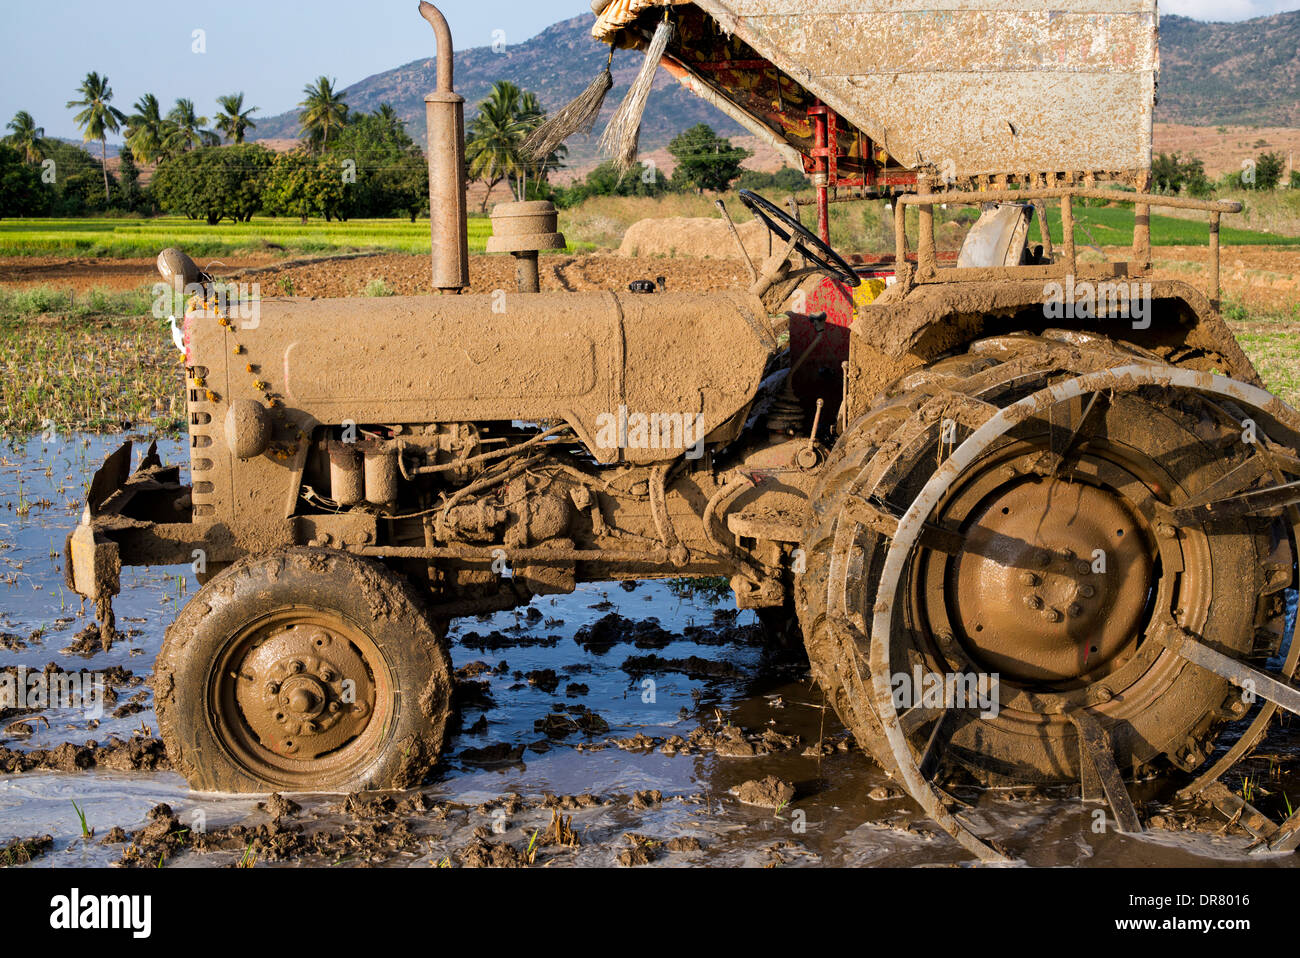 Muddy tractor used for ploughing rice paddies in the Indian countryside. Andhra Pradesh, India Stock Photo